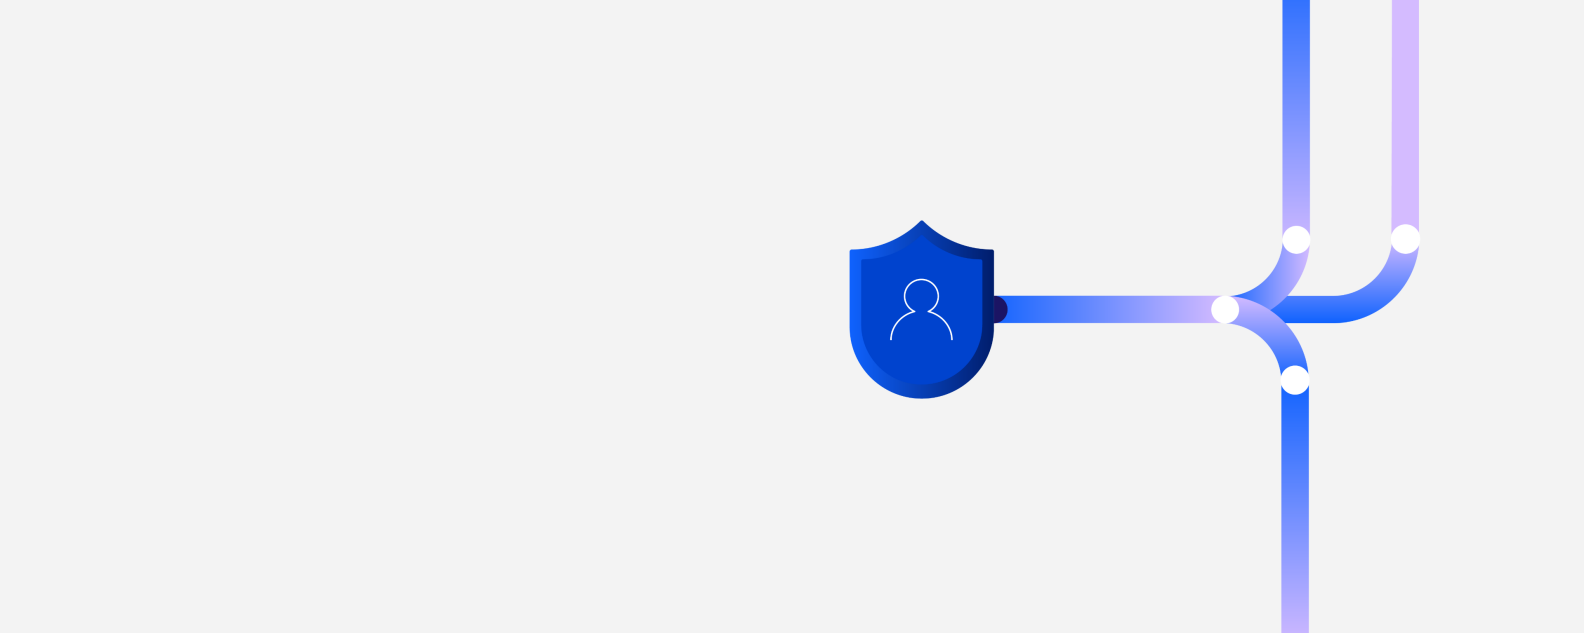 Graphic illustration in purple and blue color of a security shield connected to digital components